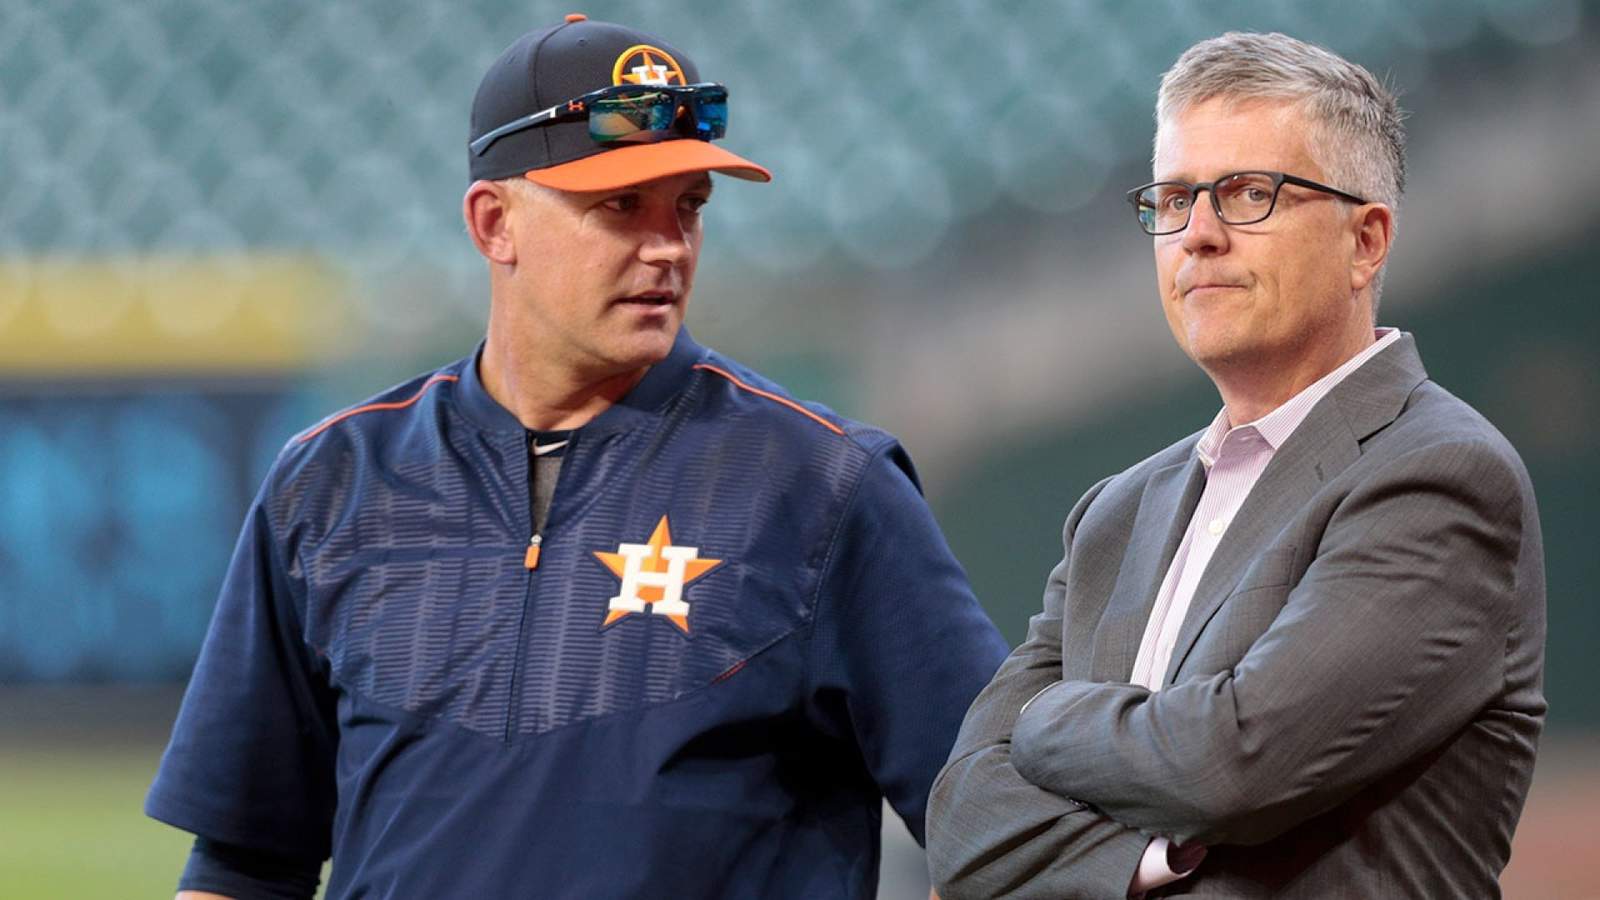 5 key takeaways from MLB’s report on the Astros sign-stealing system